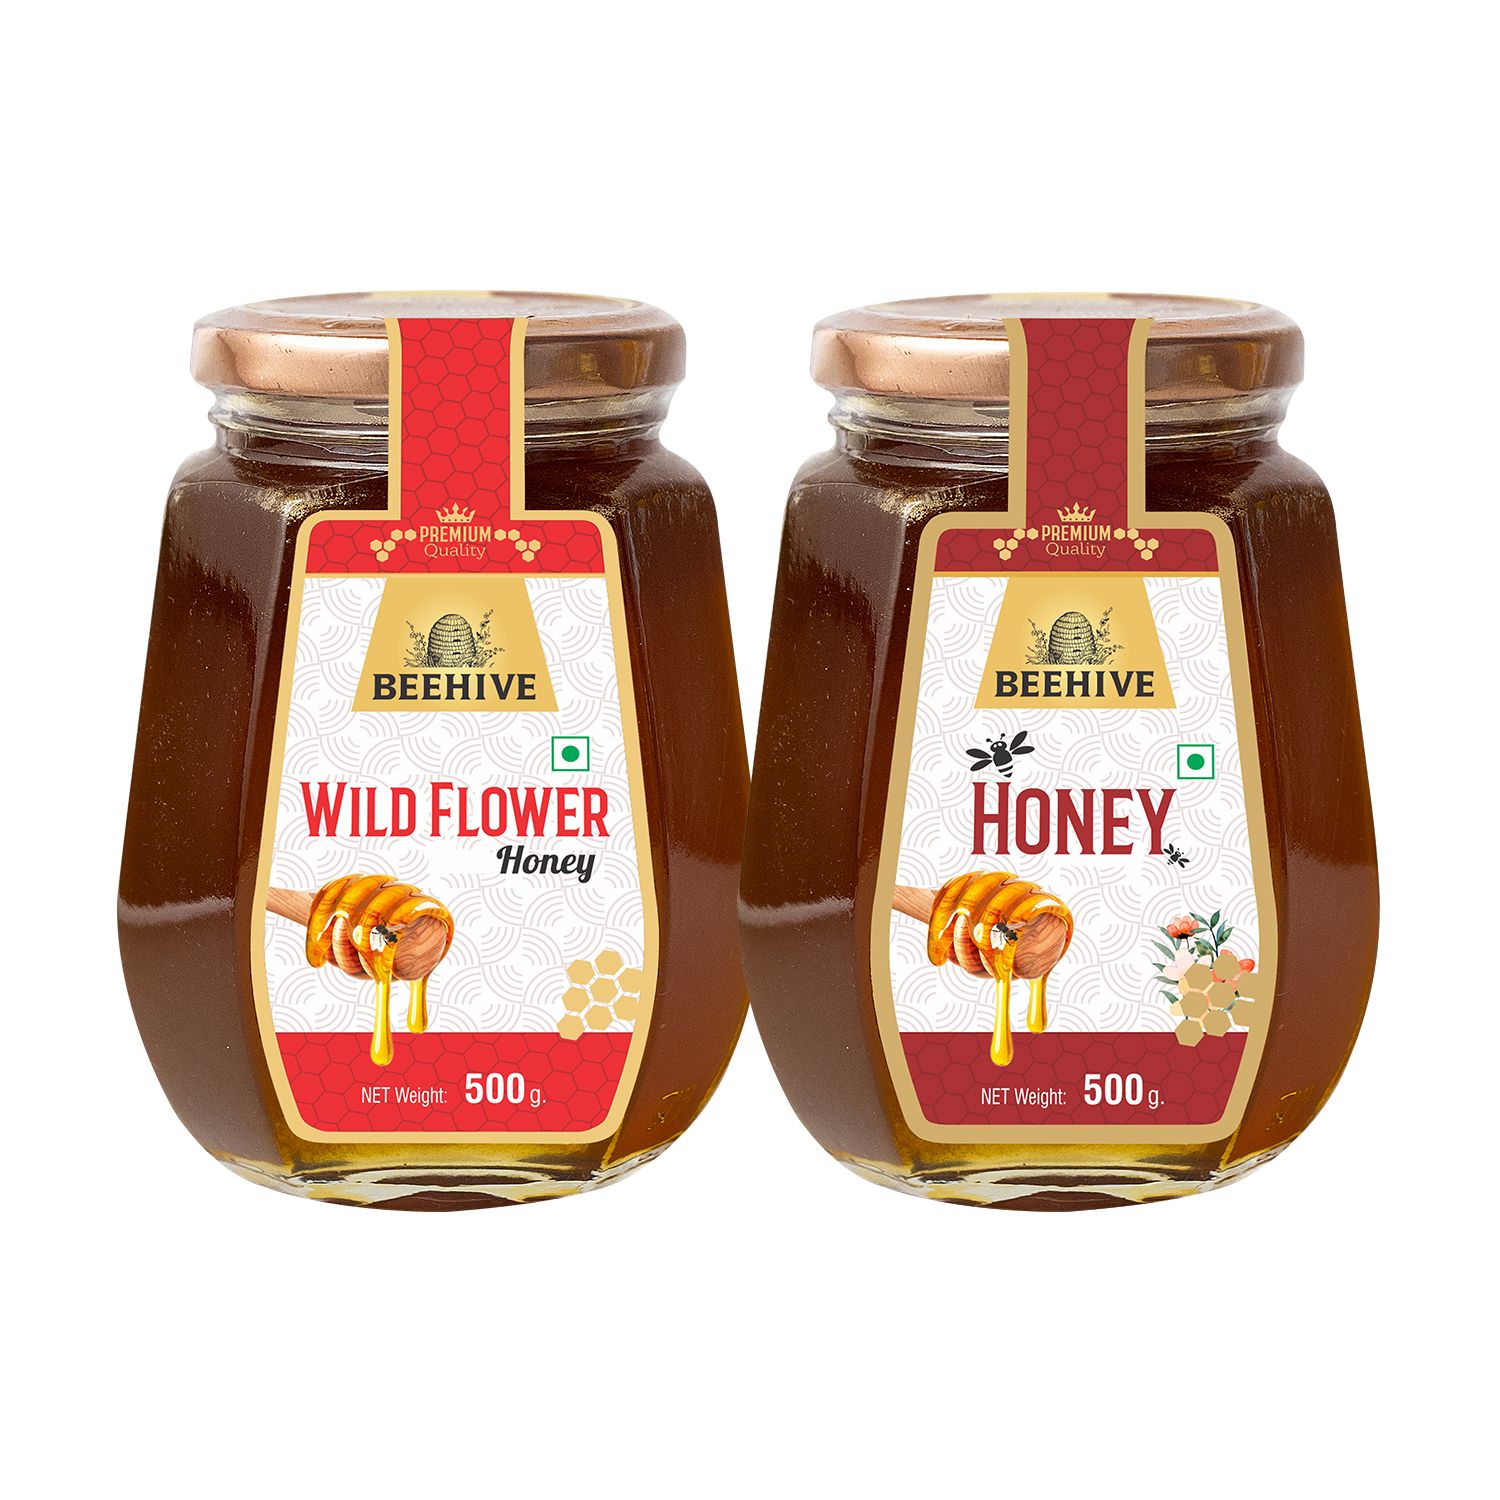 Beehive Wild Flower Honey and Honey 100% Pure Natural Honey Immunity Booster | Energy Boost & a Healthy Weight Loss Weight (500 g each) Glass Jar (PACK OF 2)